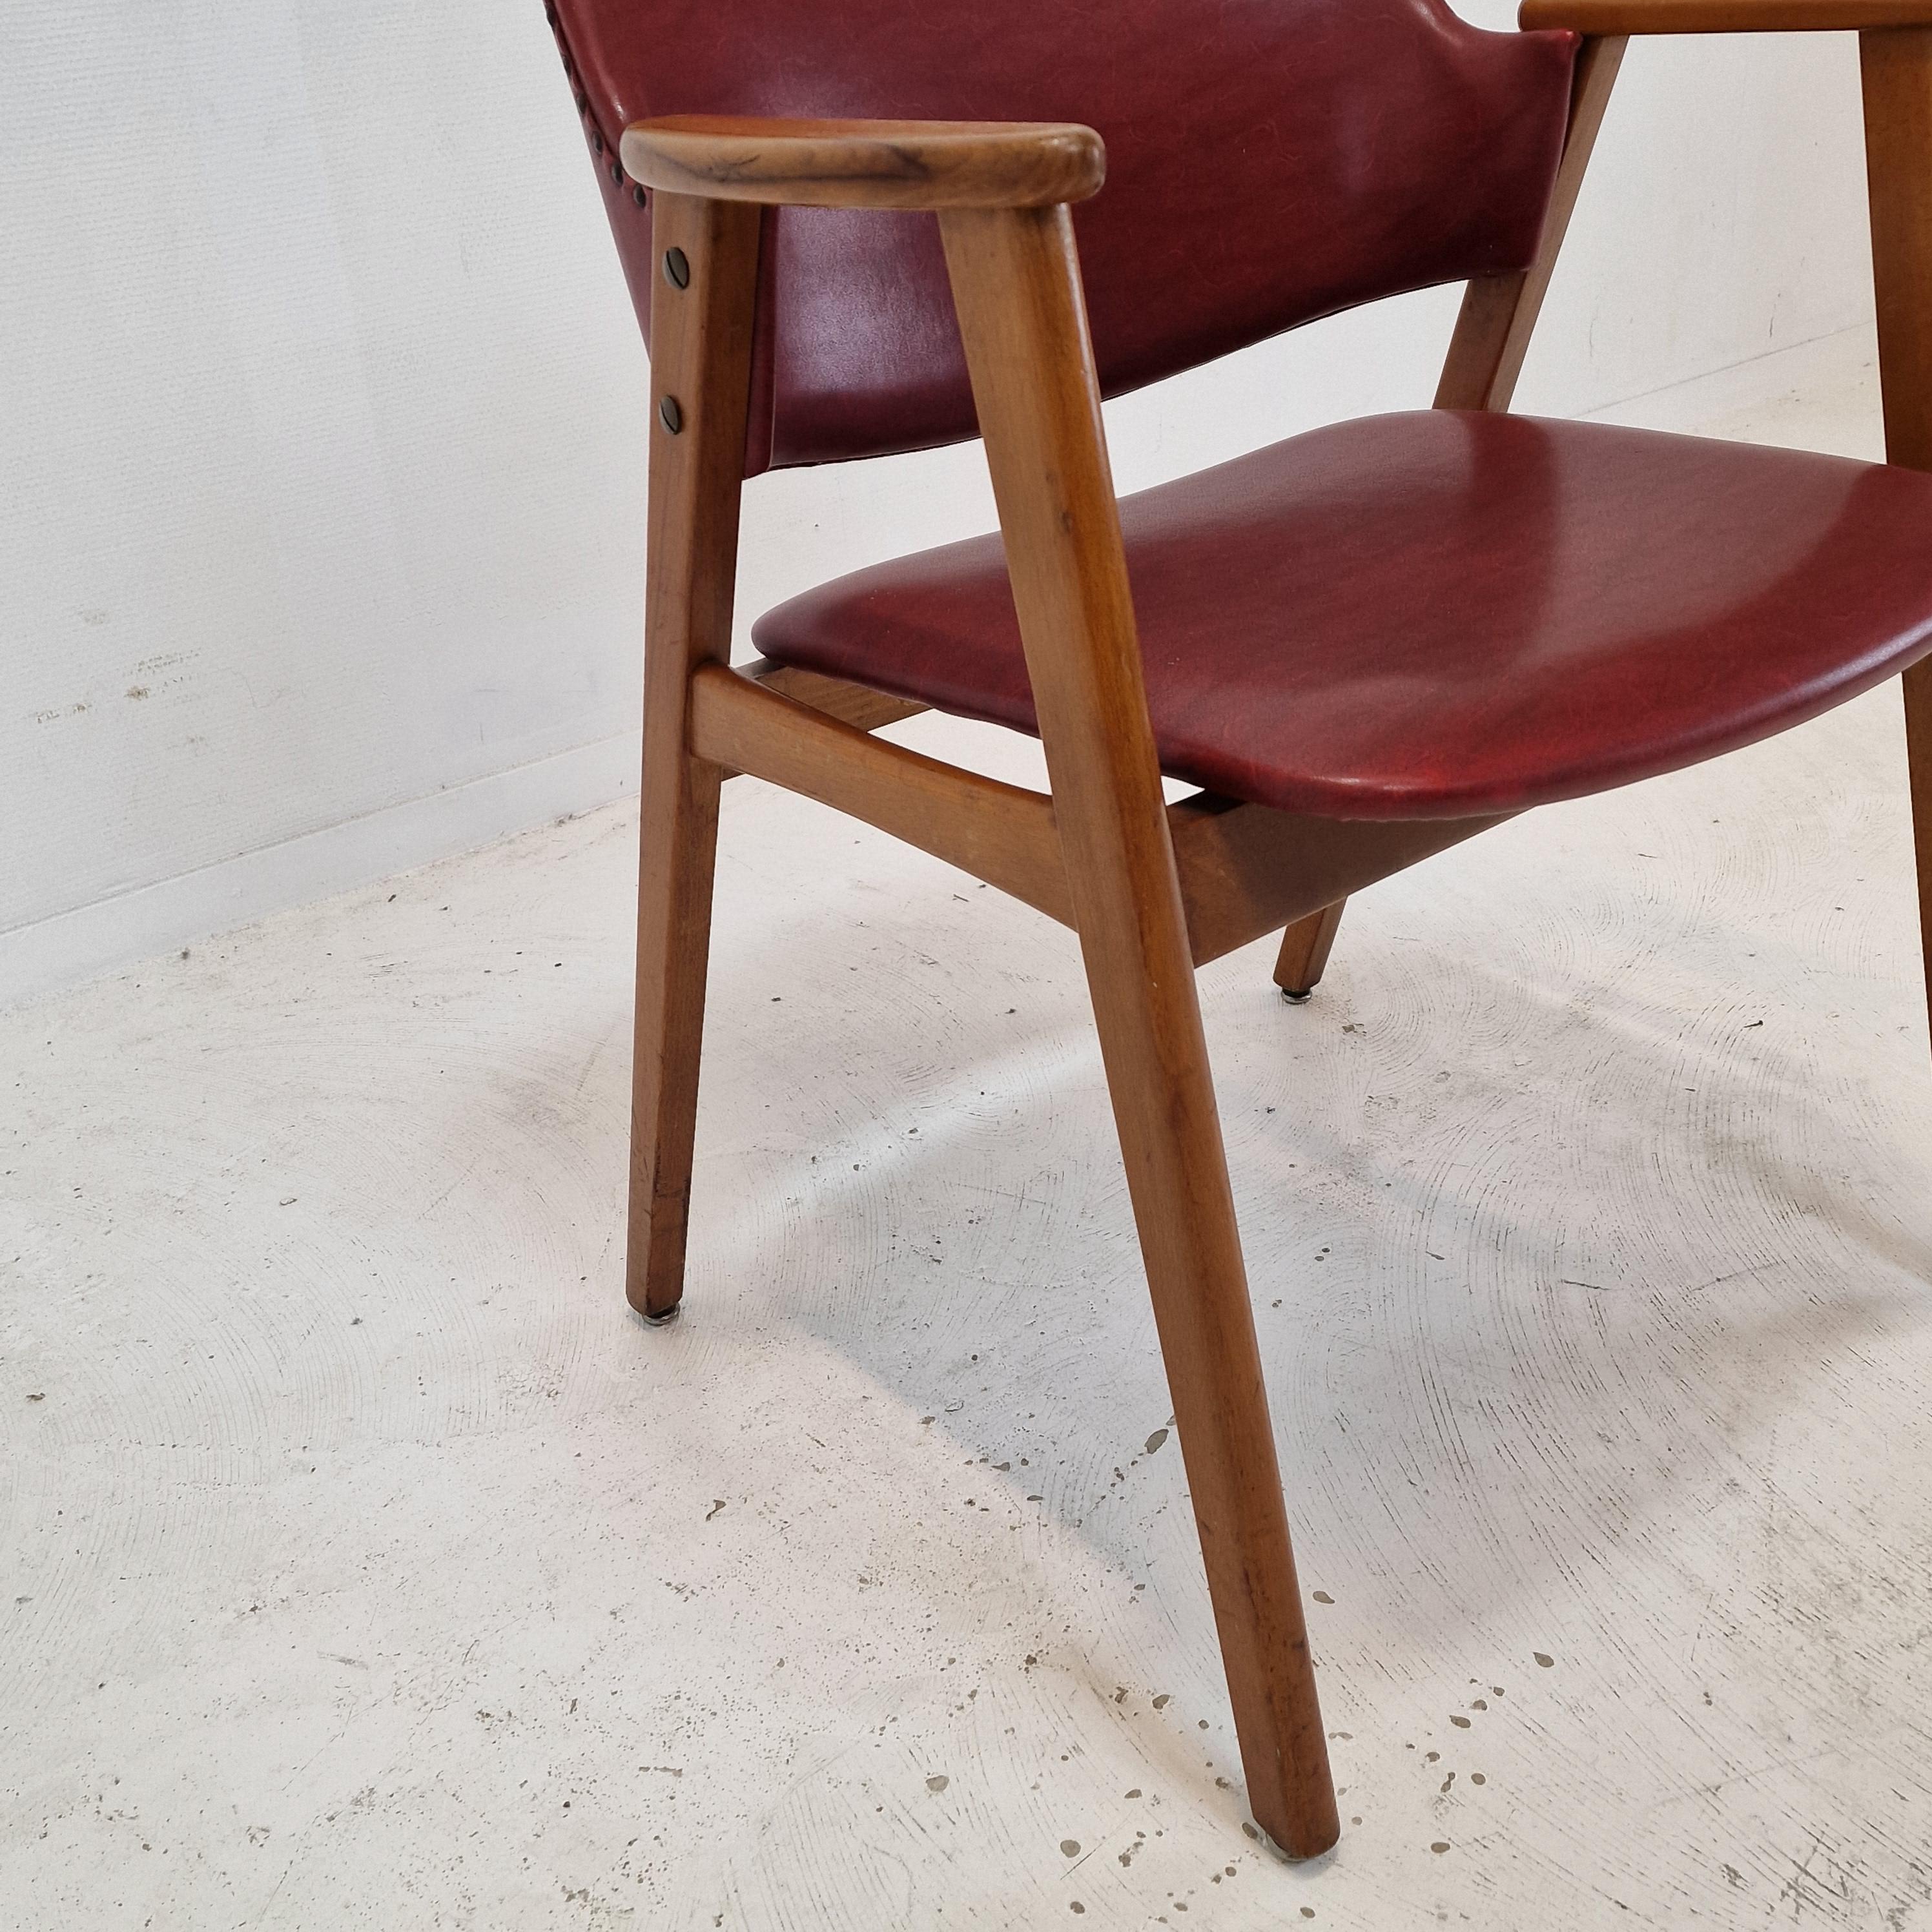 Midcentury Dining or Restaurant Chairs by Cees Braakman for Pastoe, 1950s For Sale 5